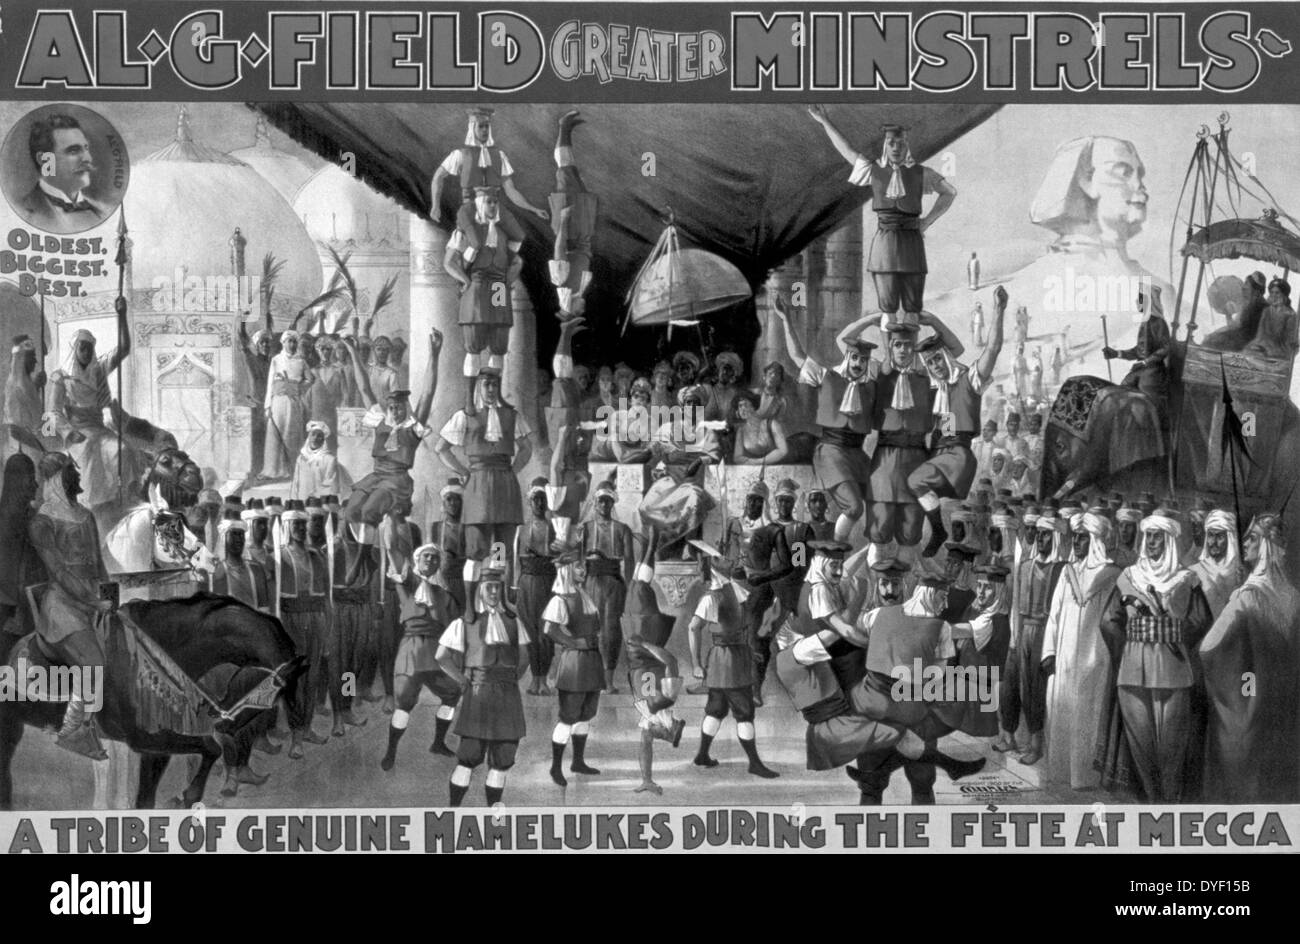 Vaudeville style painted poster advertising Al. G. Field's Greater Minstrels, described as 'A Tribe of Genuine Mamelukes during the fete at mecca'. The image shows them performing acrobatic balancing feats. Circa late 19th-Early 20th century. Stock Photo